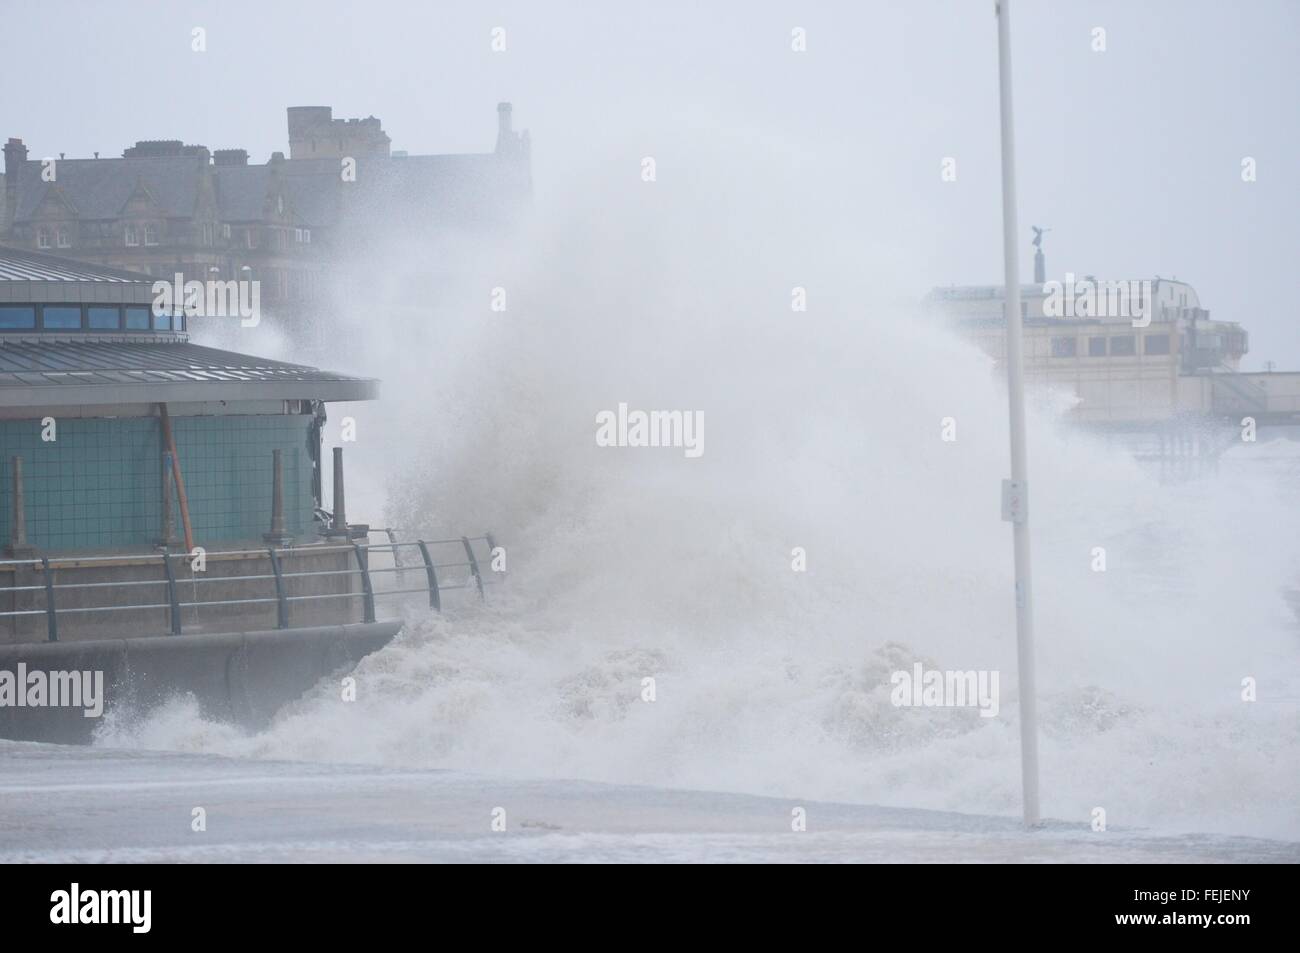 Aberystwyth Ceredigion, west Wales UK. 8th February, 2016. UK Weather: Gale force winds from Storm Imogen, the 9th named storm of the winter, combined with the peak of the tide, create huge waves lashing against the promenade and sea defences at Aberystwyth on the west Wales coast Much of southern England and South Wales is subject to yellow and amber weather warnings, with the risk of damaging gusts of wind and powerful waves along coastal areas. photo Credit:  keith morris/Alamy Live News Stock Photo